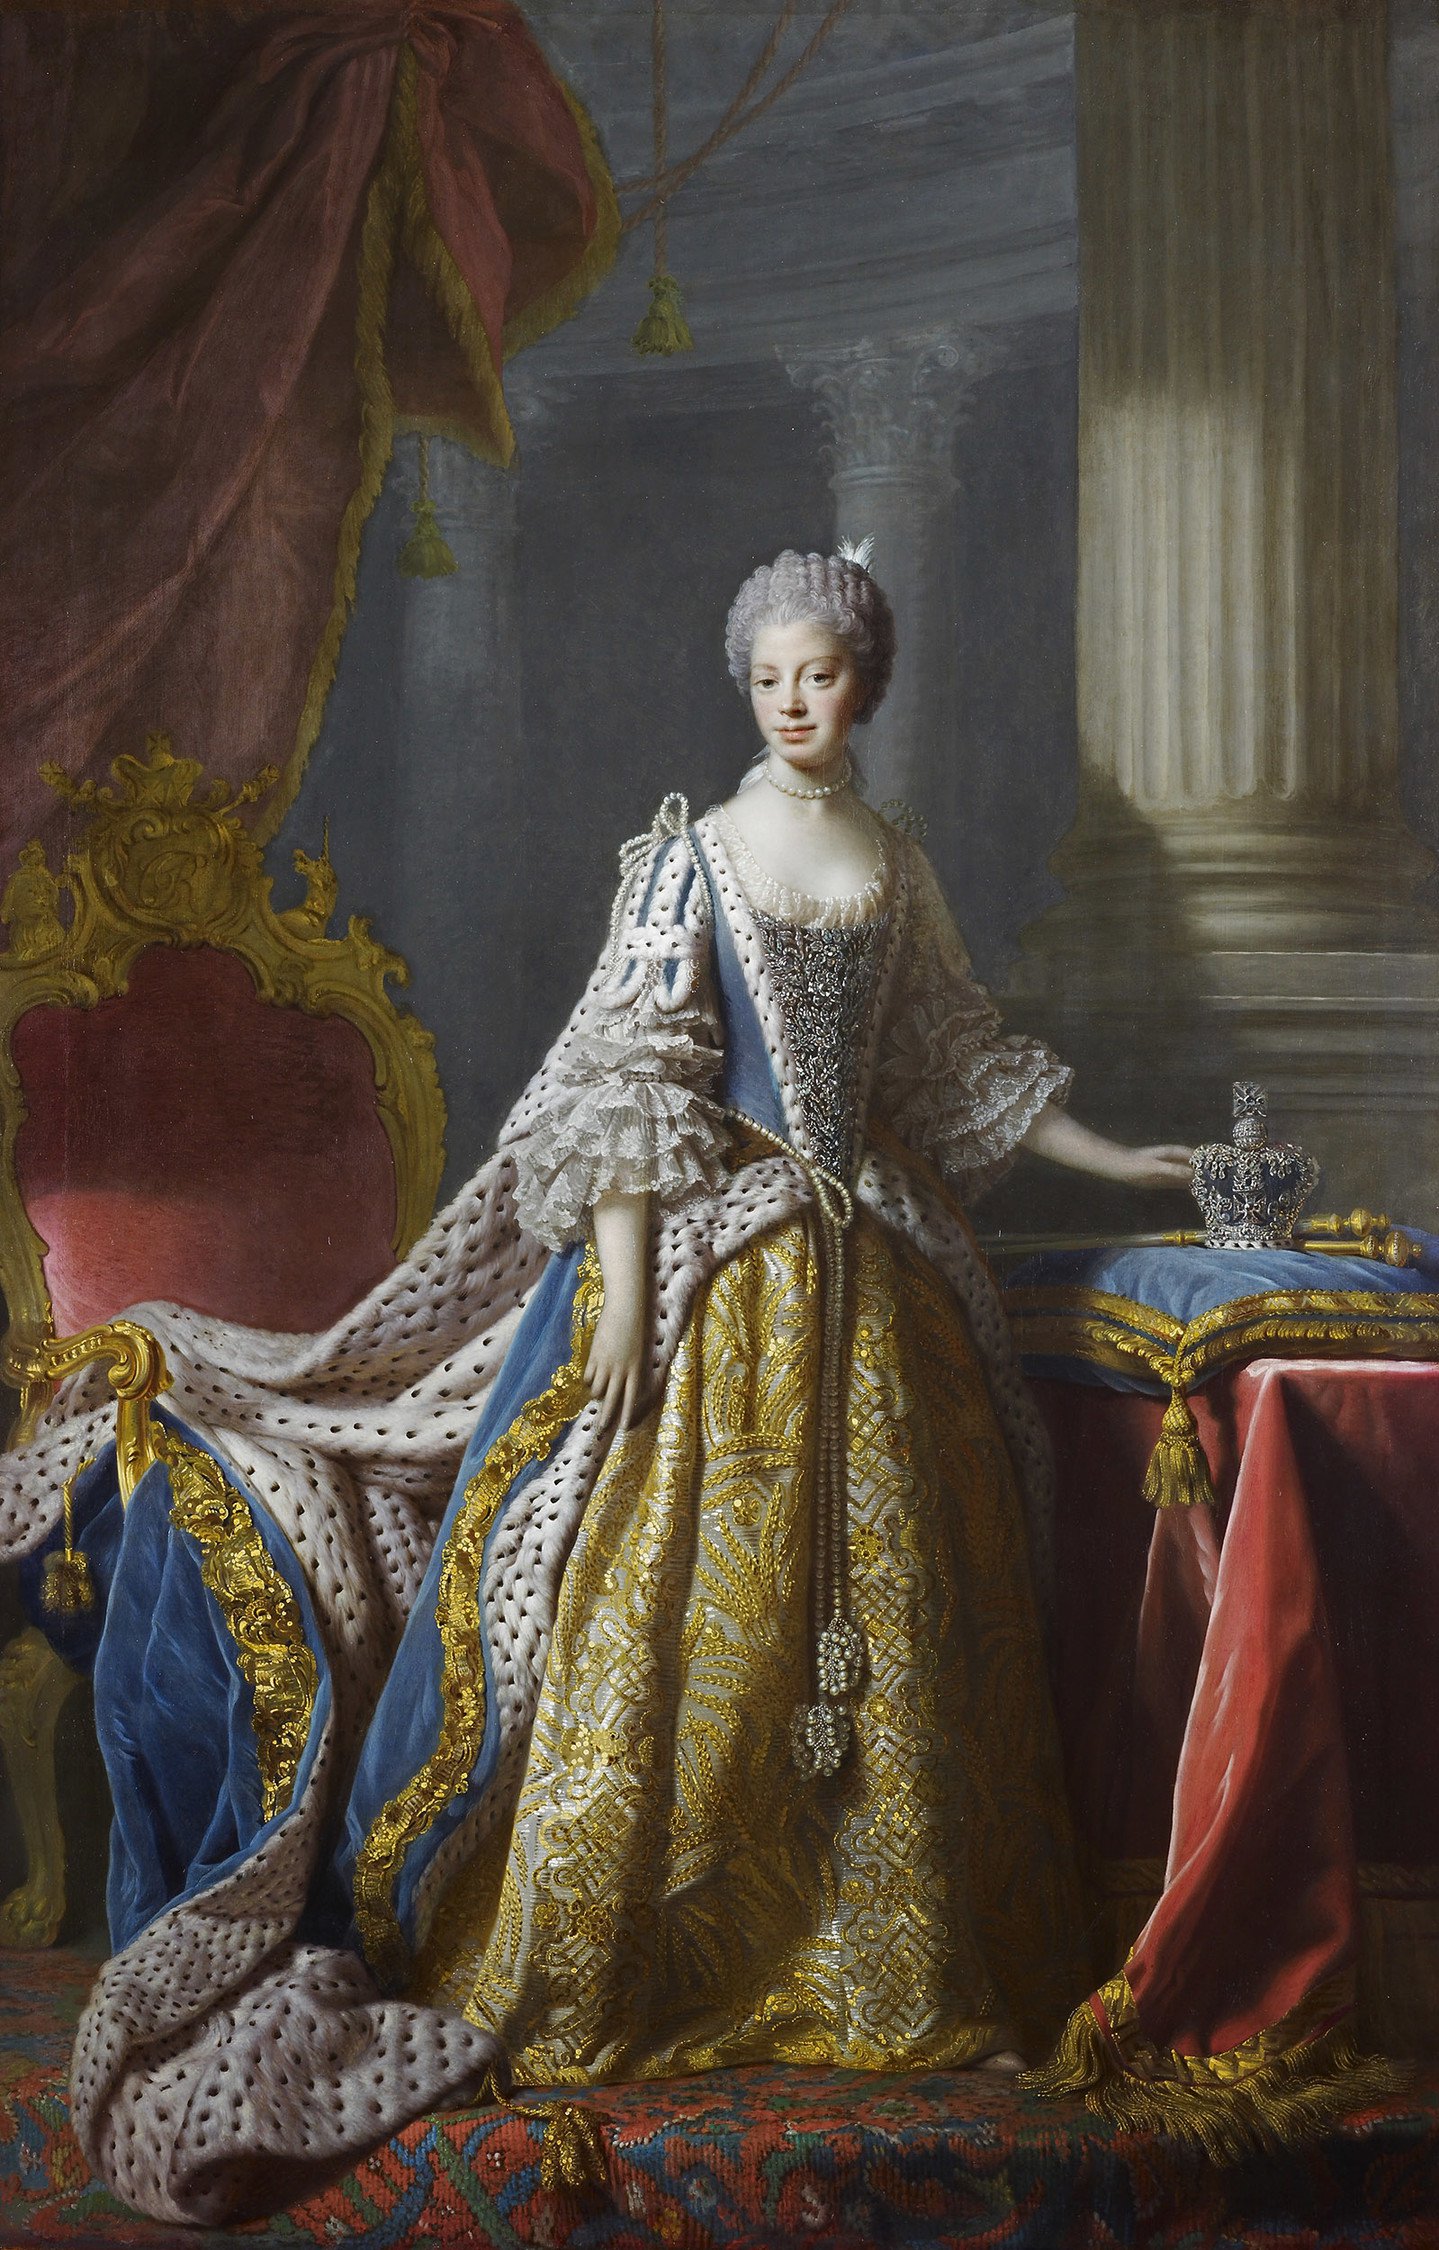 Coronation portrait of Queen Charlotte of Mecklenburg-Strelitz by Allan Ramsay (c. 1760-61). Image: Royal Collection